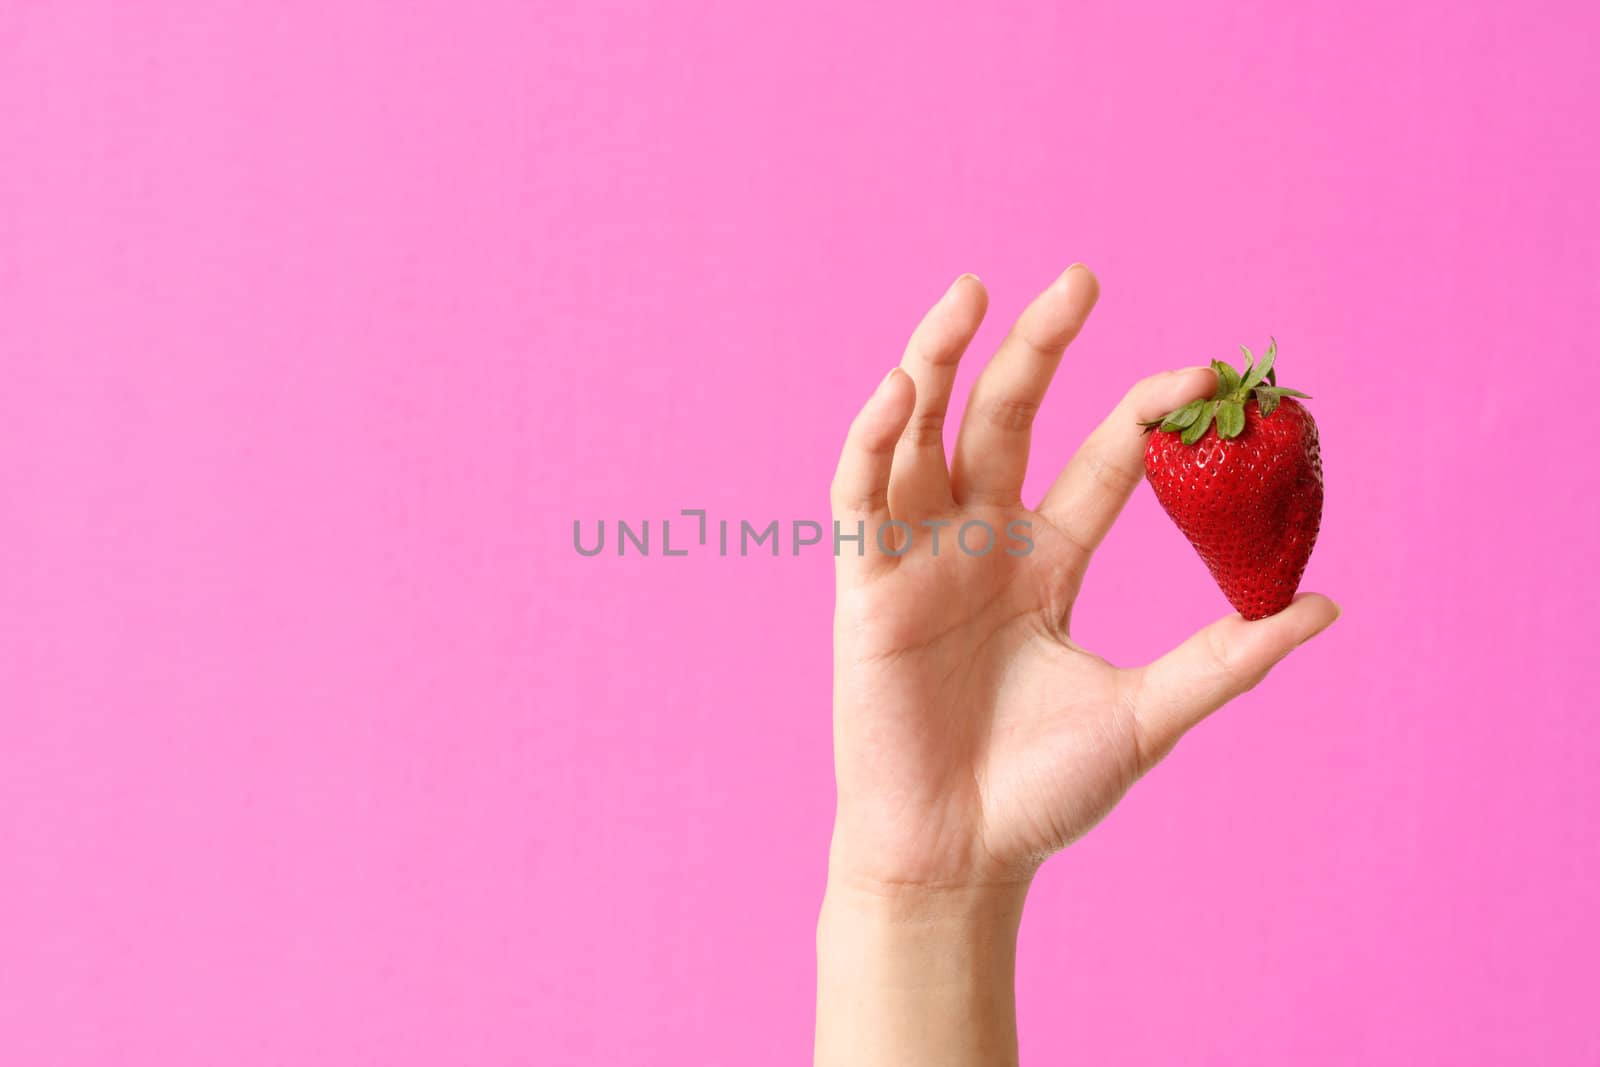 A woman holding a strawberry against pink background